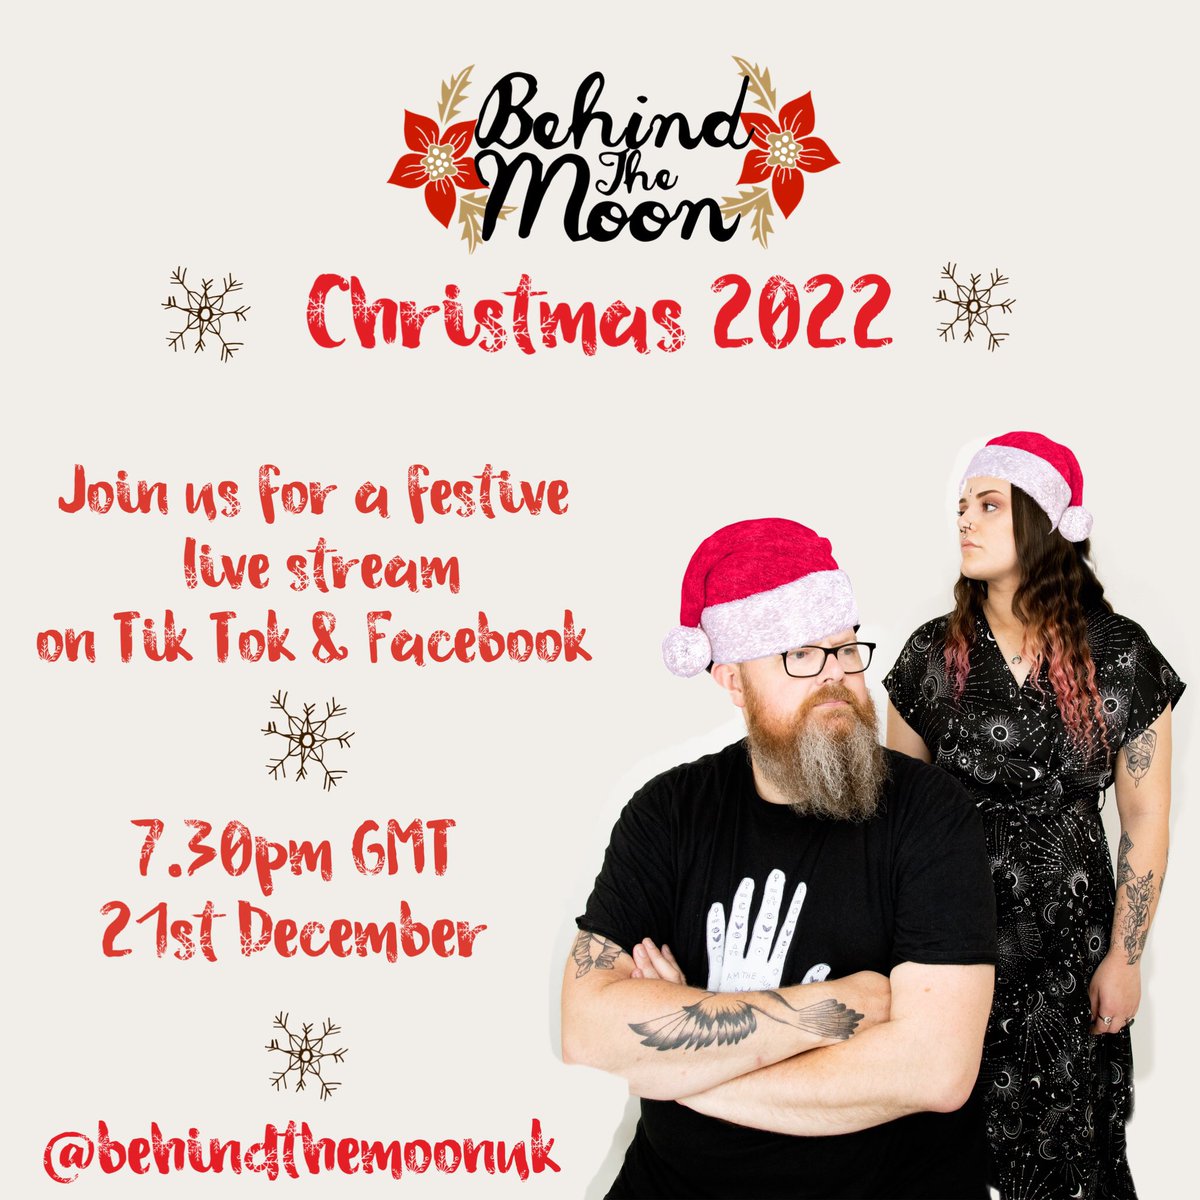 NEWS! we have a live stream on Facebook and Tik Tok 21st December 7.30pm gmt #ticktokstreaming #facebooklive #livestream #streaming